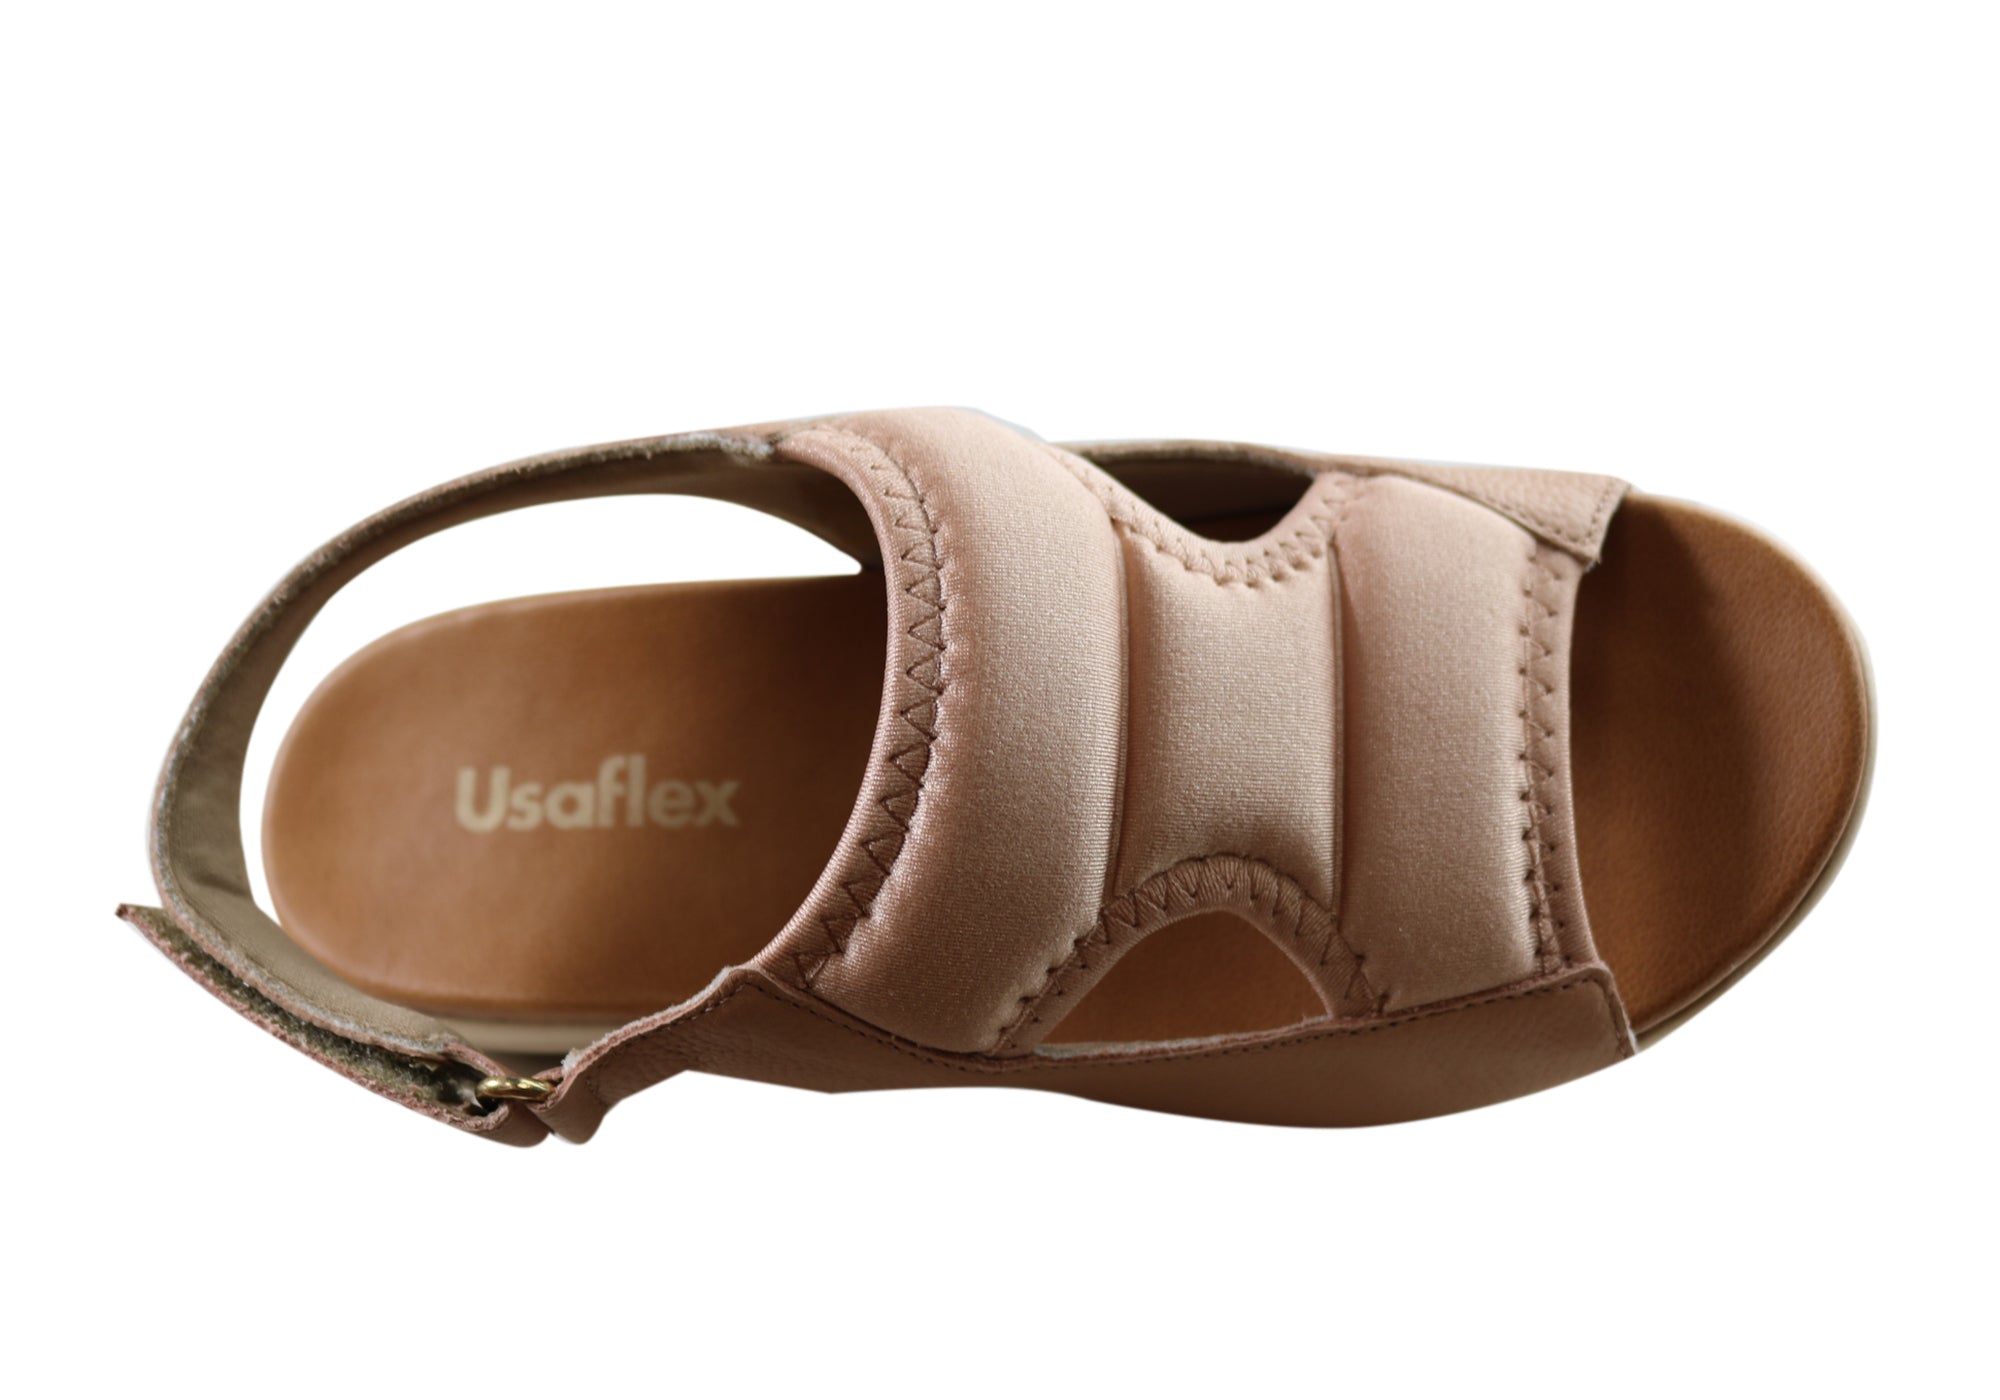 Usaflex Eloise Womens Comfortable Leather Sandals Made In Brazil